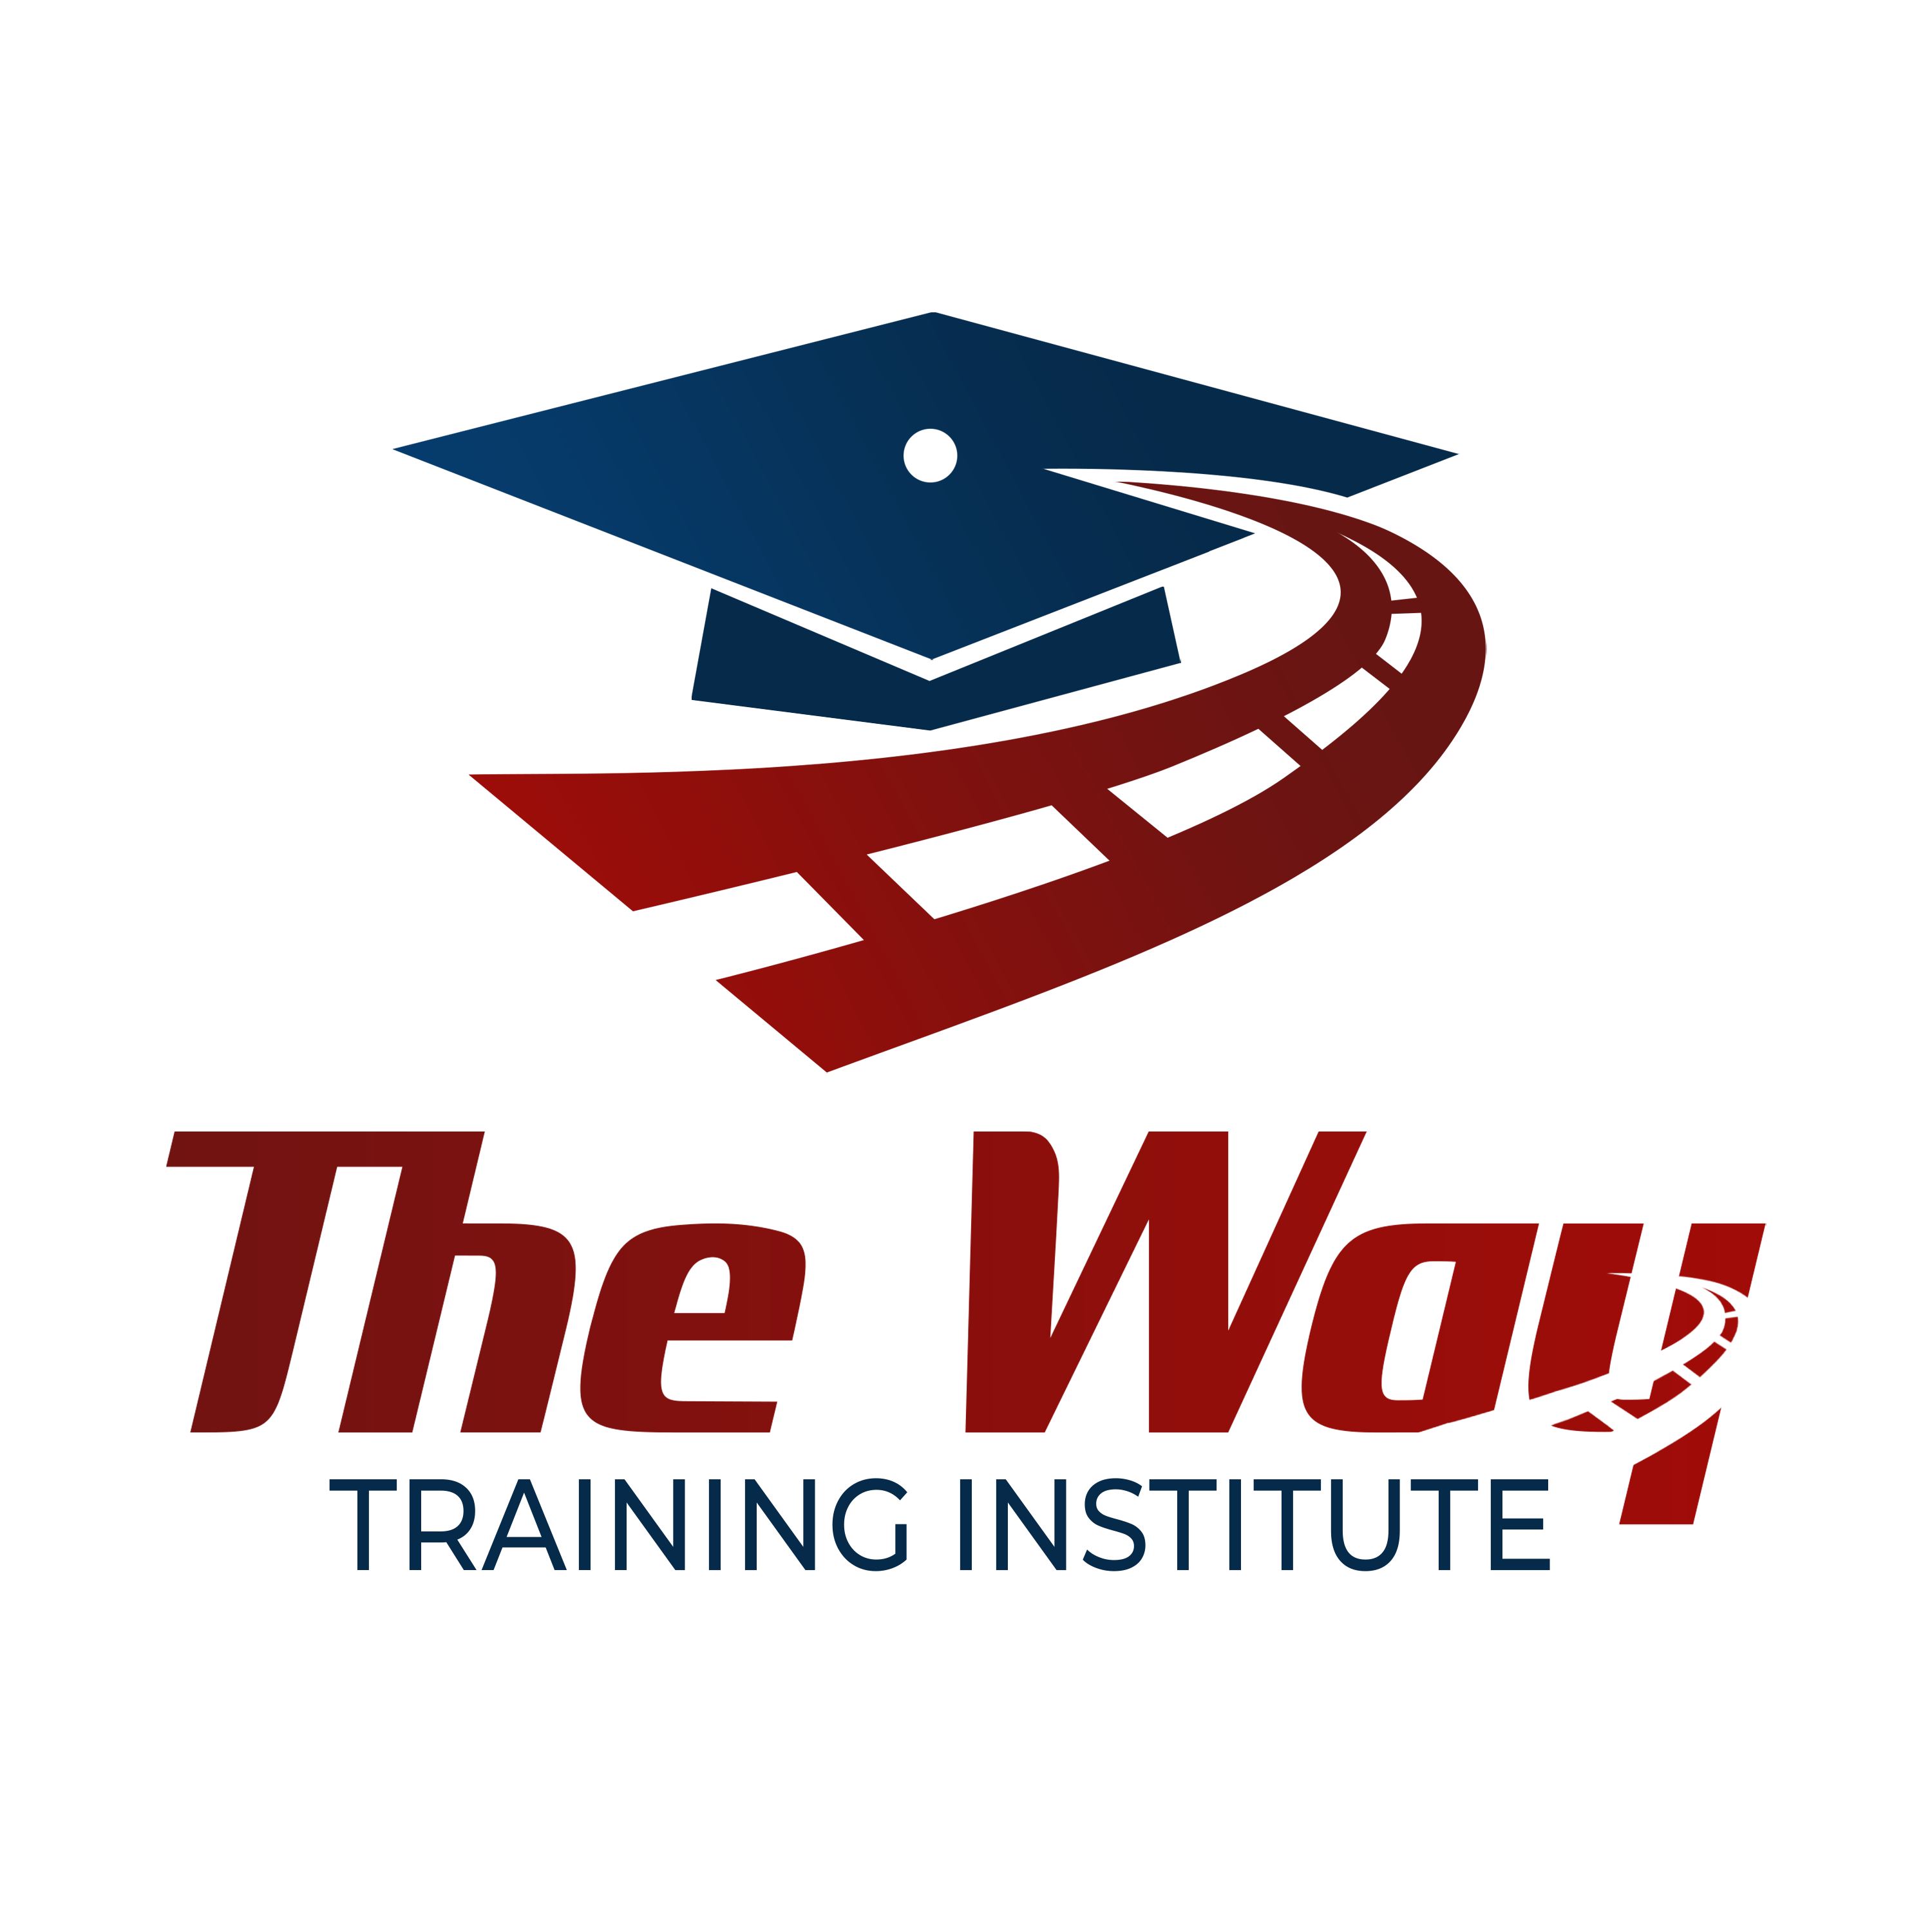 The way logo png - The Way Training Institute